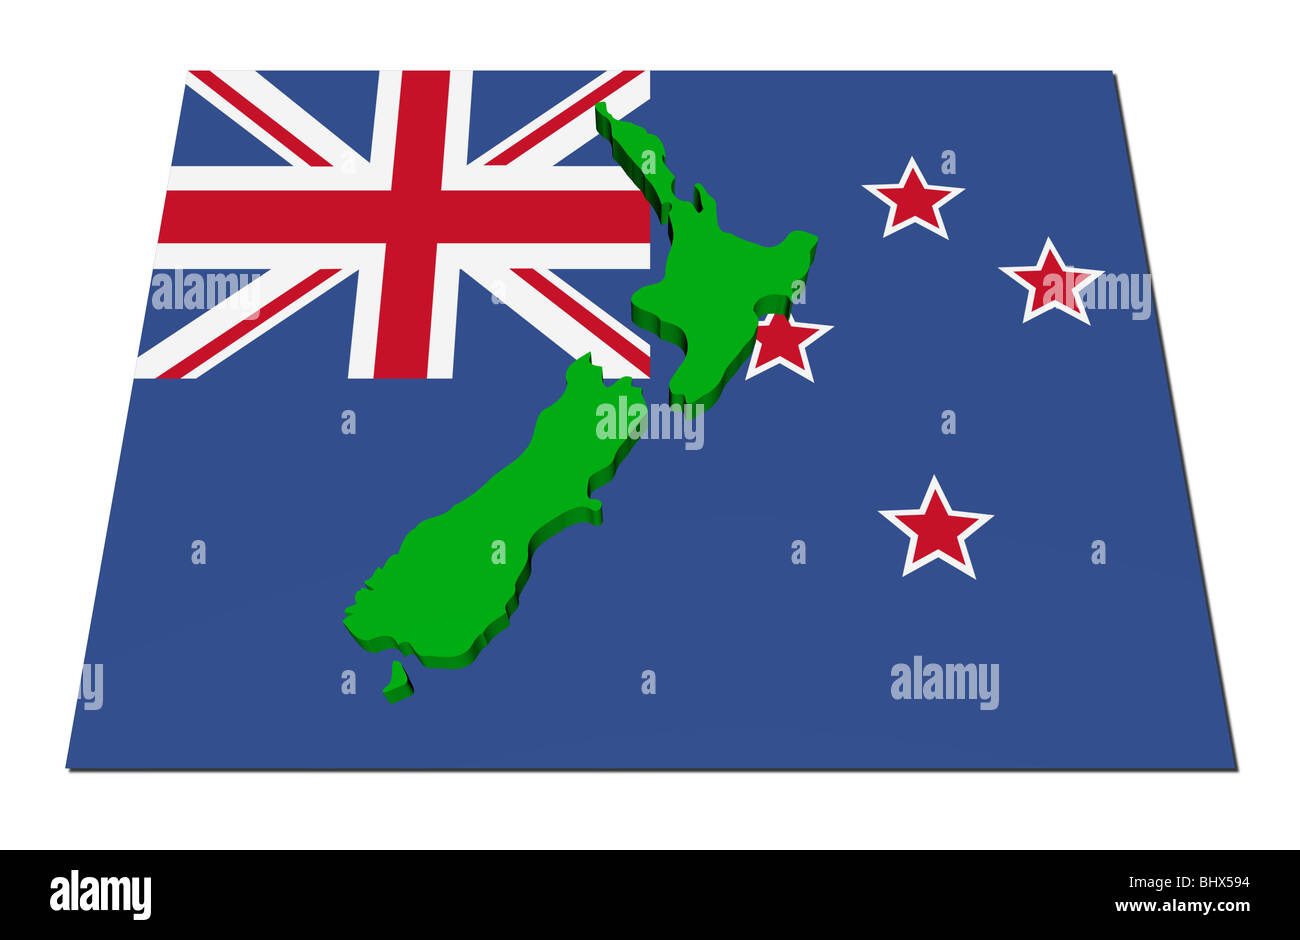 New Zealand 3d render map on their flag illustration Stock Photo